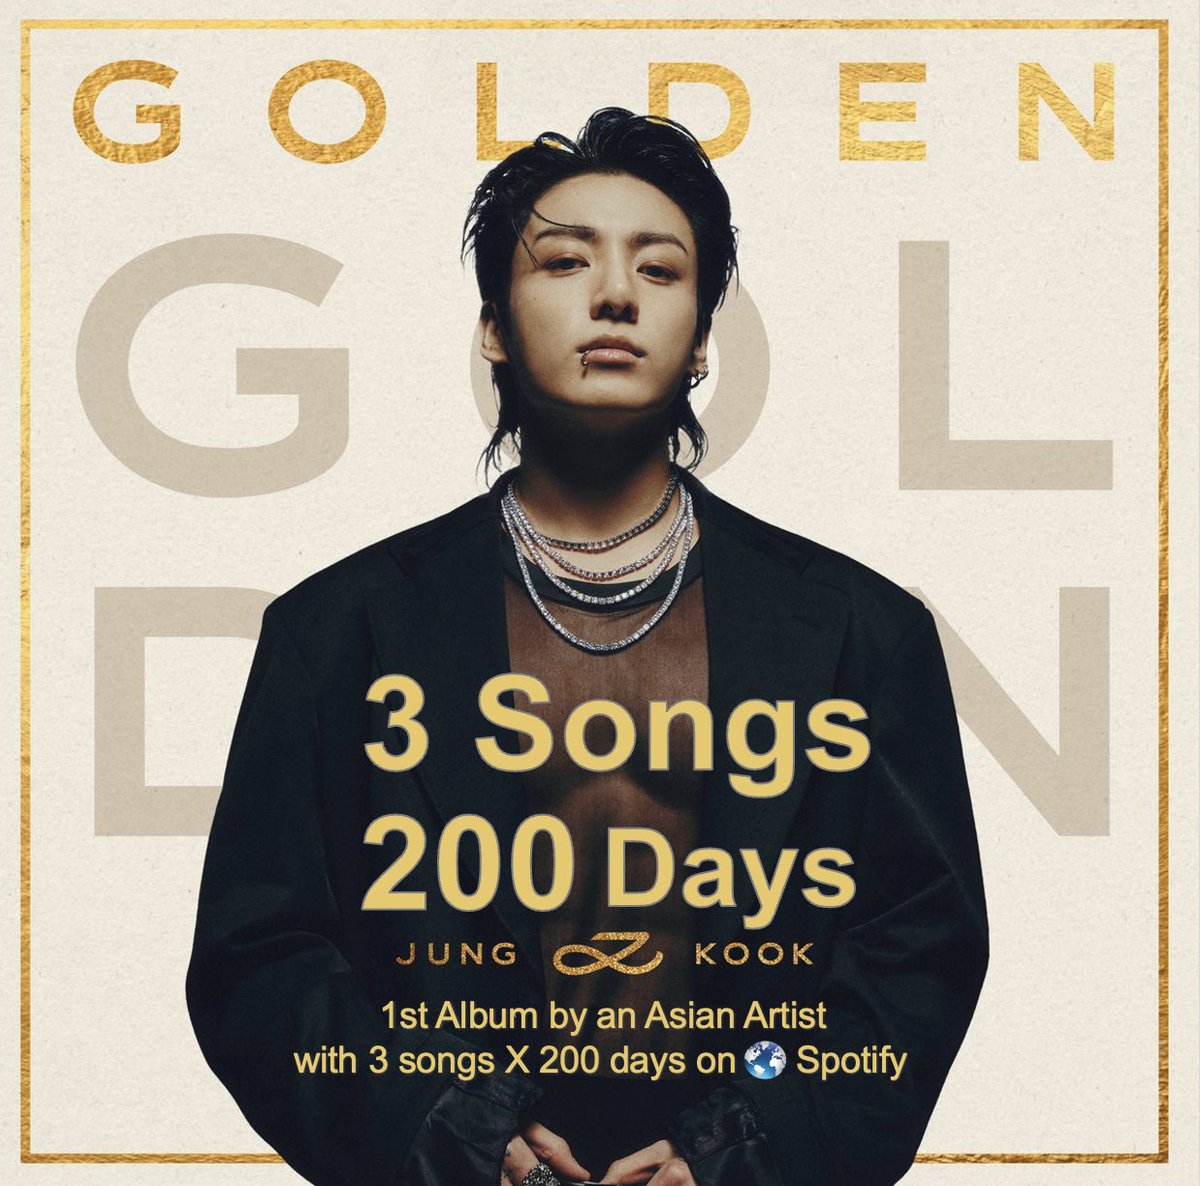 #JUNGKOOK's 'GOLDEN' is now the 1st Album by an Asian Act to have 3 songs spend 200 days on Global Spotify! 💪📀🥇🌏👨‍🎤💿📈3⃣🎶✖️2⃣0⃣0⃣🕛🌎🎧🔥👑🖤 GLOBAL POPSTAR JUNGKOOK #GOLDEN